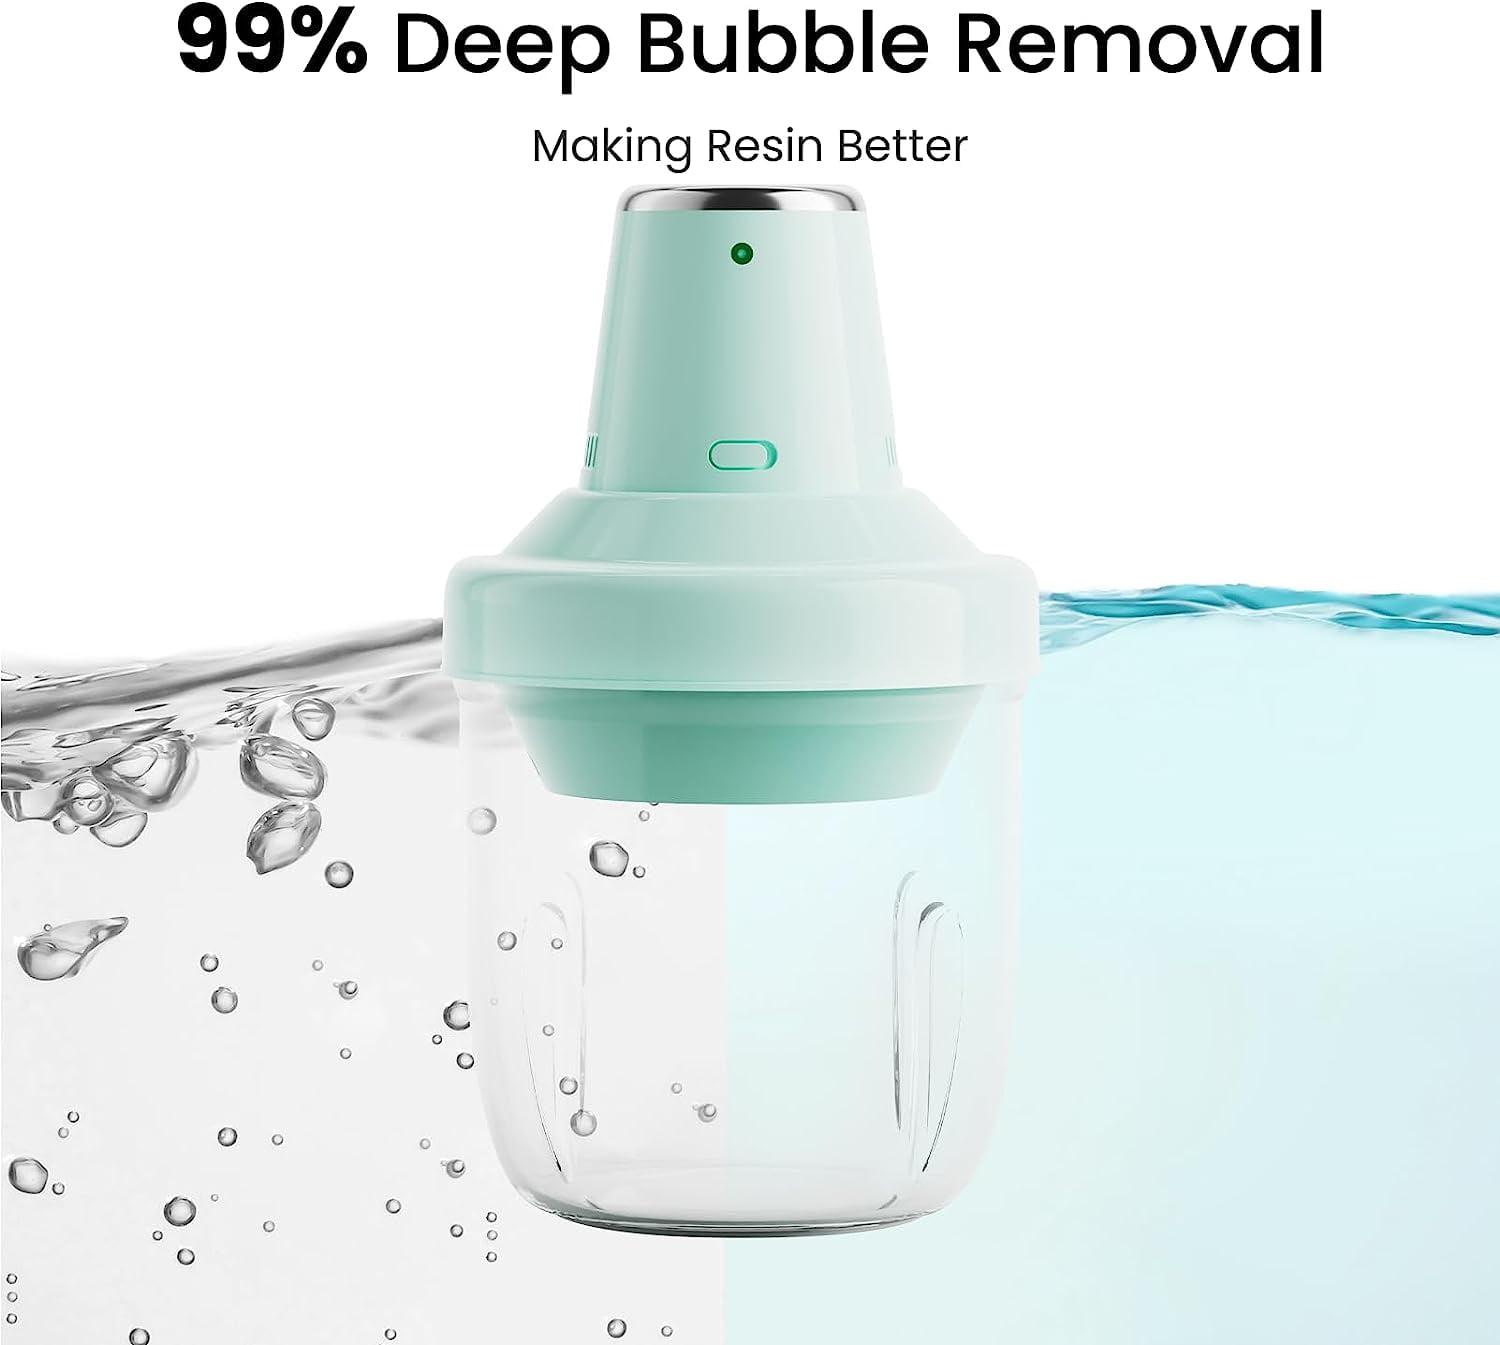 Resin Bubble Remover Solution 100ML- Pack of 1, Online Store Items